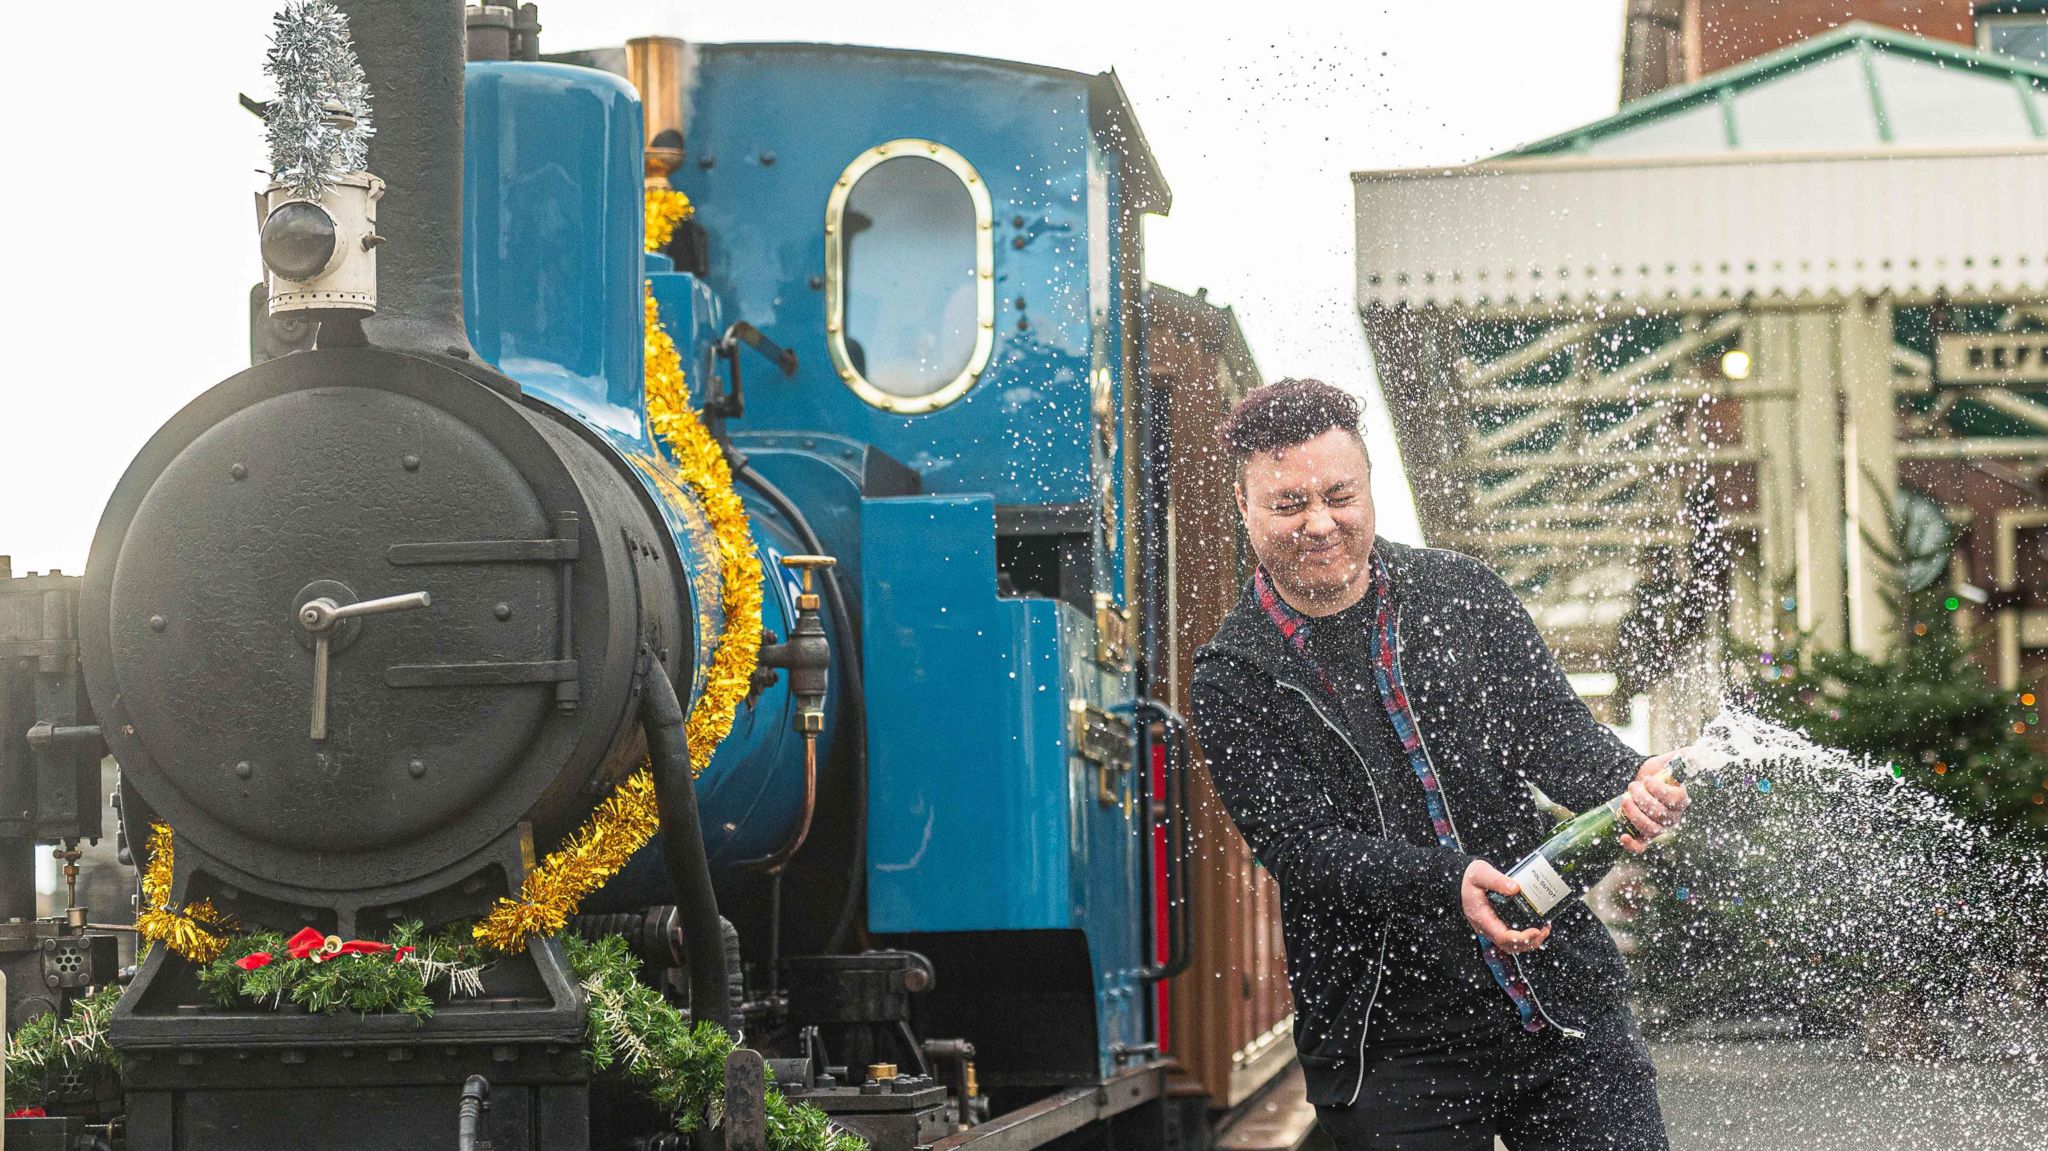 Lottery winner Neil Leighton with a bottle of champagne and a locomotive in the background